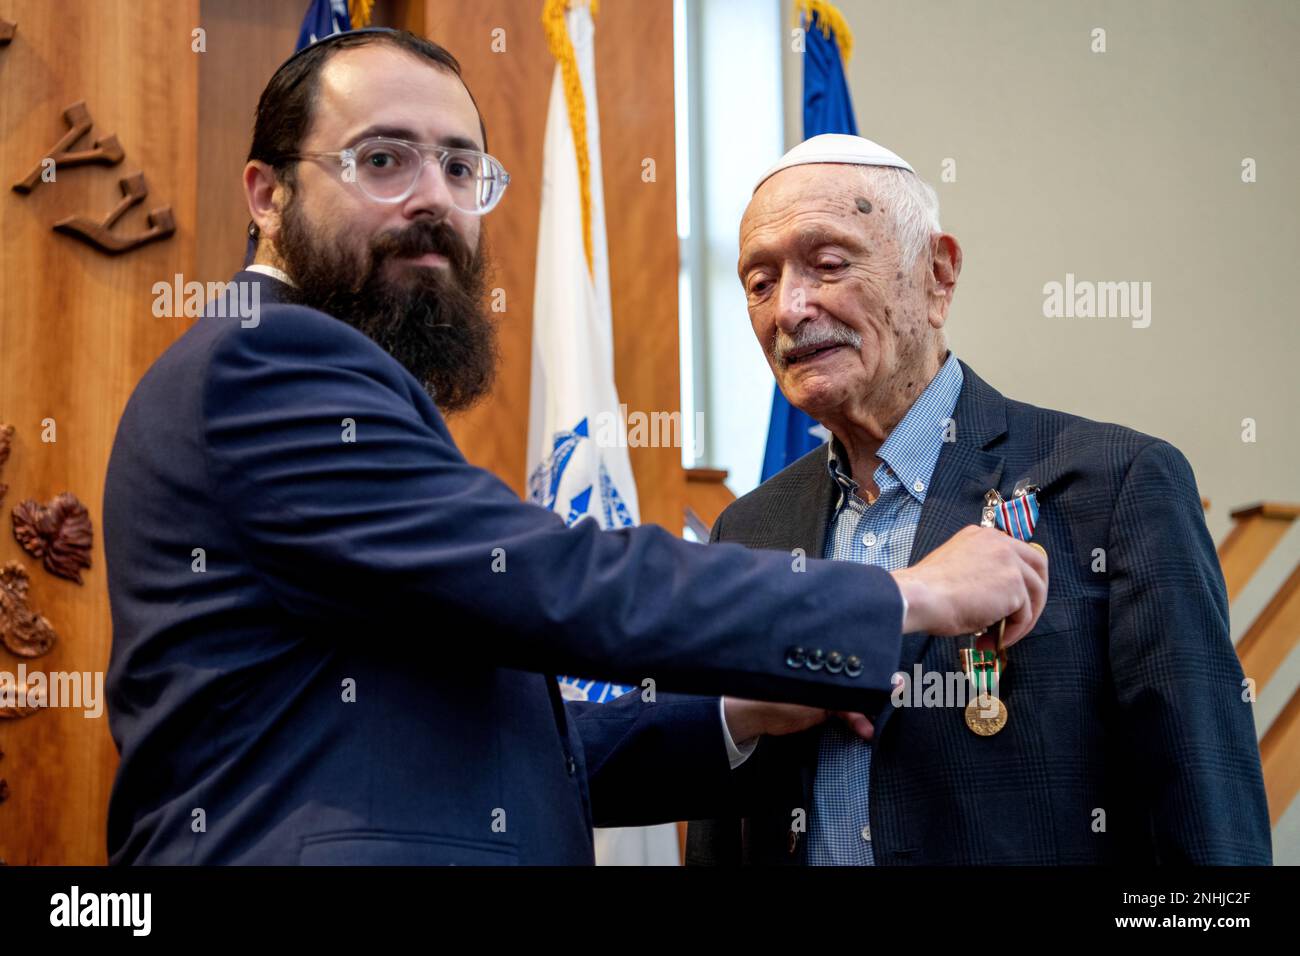 U.S. Army Air Corps 1st Lt. Gerald Teldon (right), retired, receives his award from his grandson, Rabbi Levi Teldon, for his honorable service as a pilot on July 29, 2022, at the Chabad Center for Jewish Life and Learning, San Antonio, Texas. Teldon, born in Bronx, N.Y., in 1924, joined the military in 1944. He completed 62 missions during WWII and the Korean War. Lt. Col. Andrew Stein, 502nd Operations Support Squadron commander, was the presiding officers. The awards presented to Teldon are as follows: the Air Medal; American Campaign Medal; European – African – Middle Eastern Campaign Medal Stock Photo